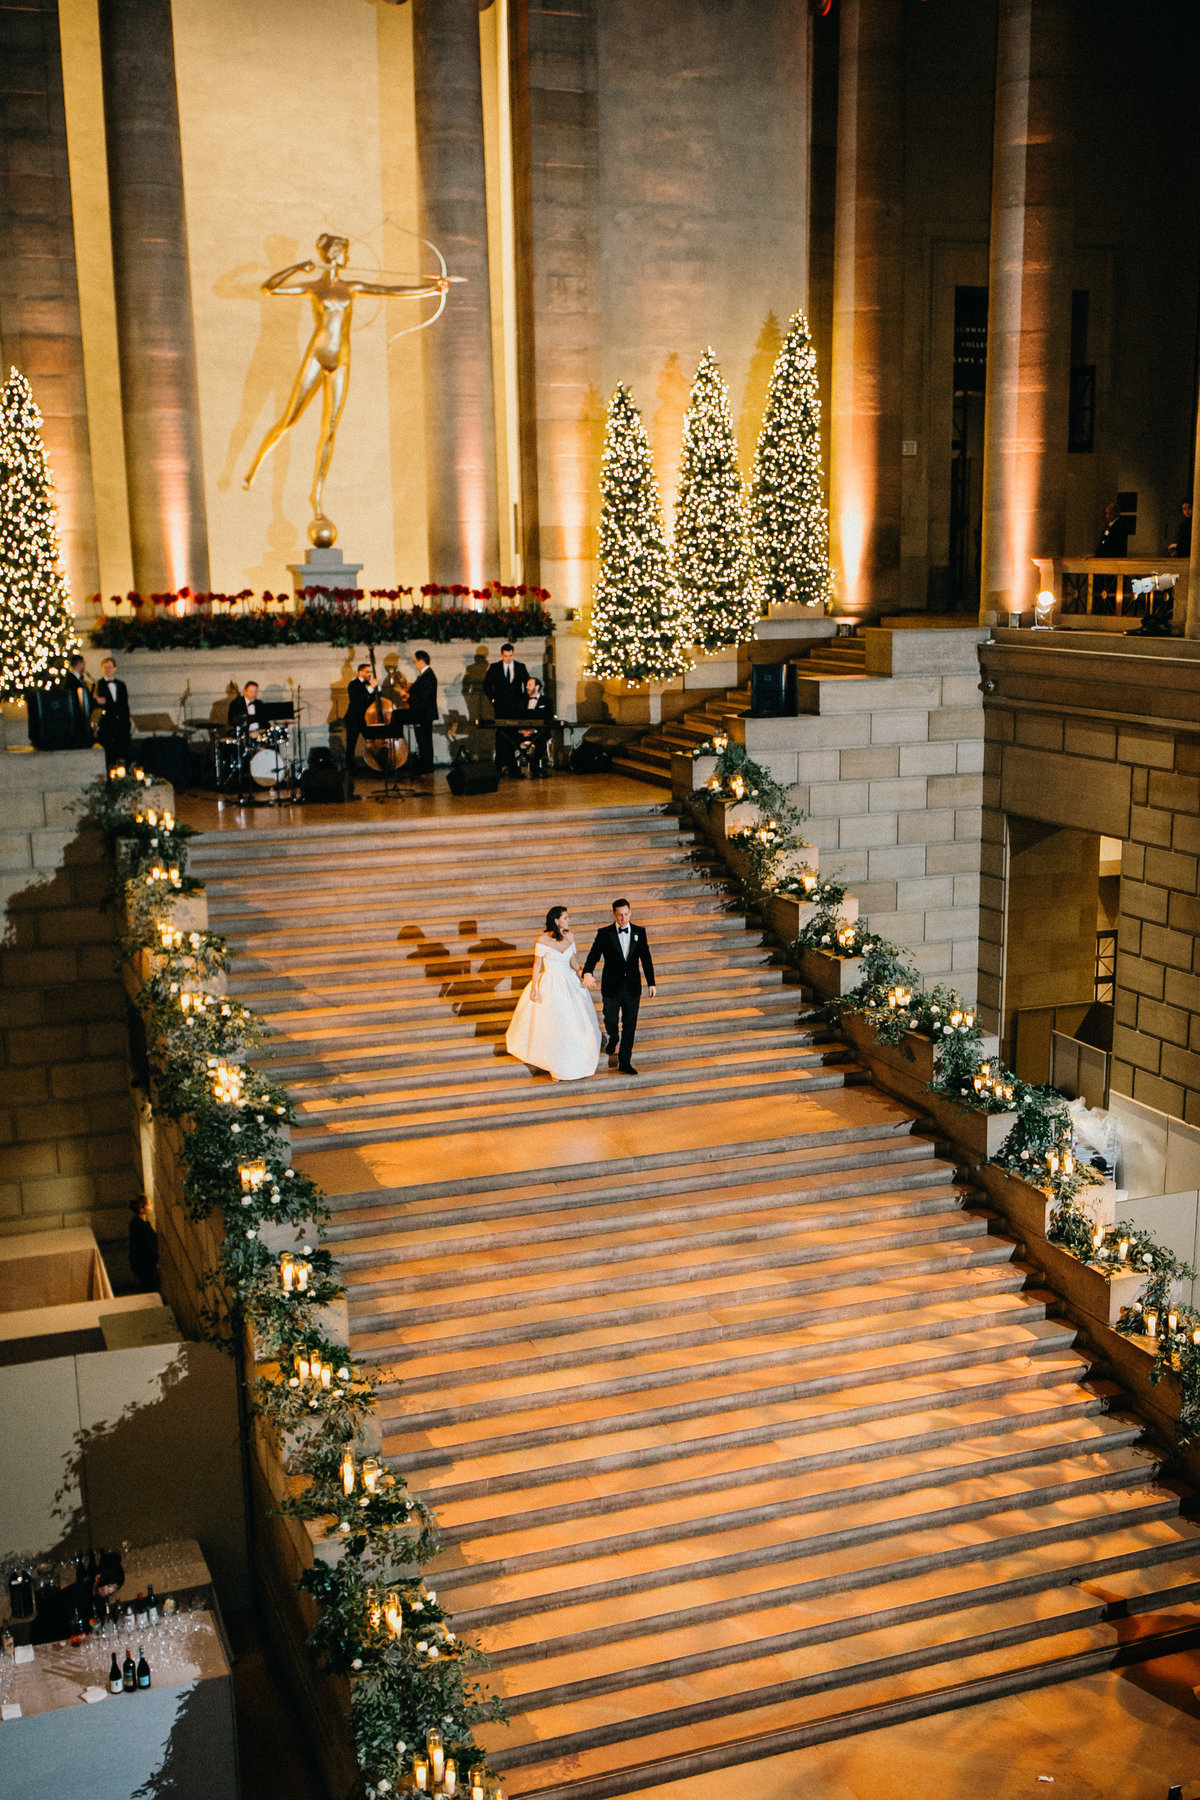 Bride and groom's grand entrance on the Diana Staircase leading down to all their wedding guests.